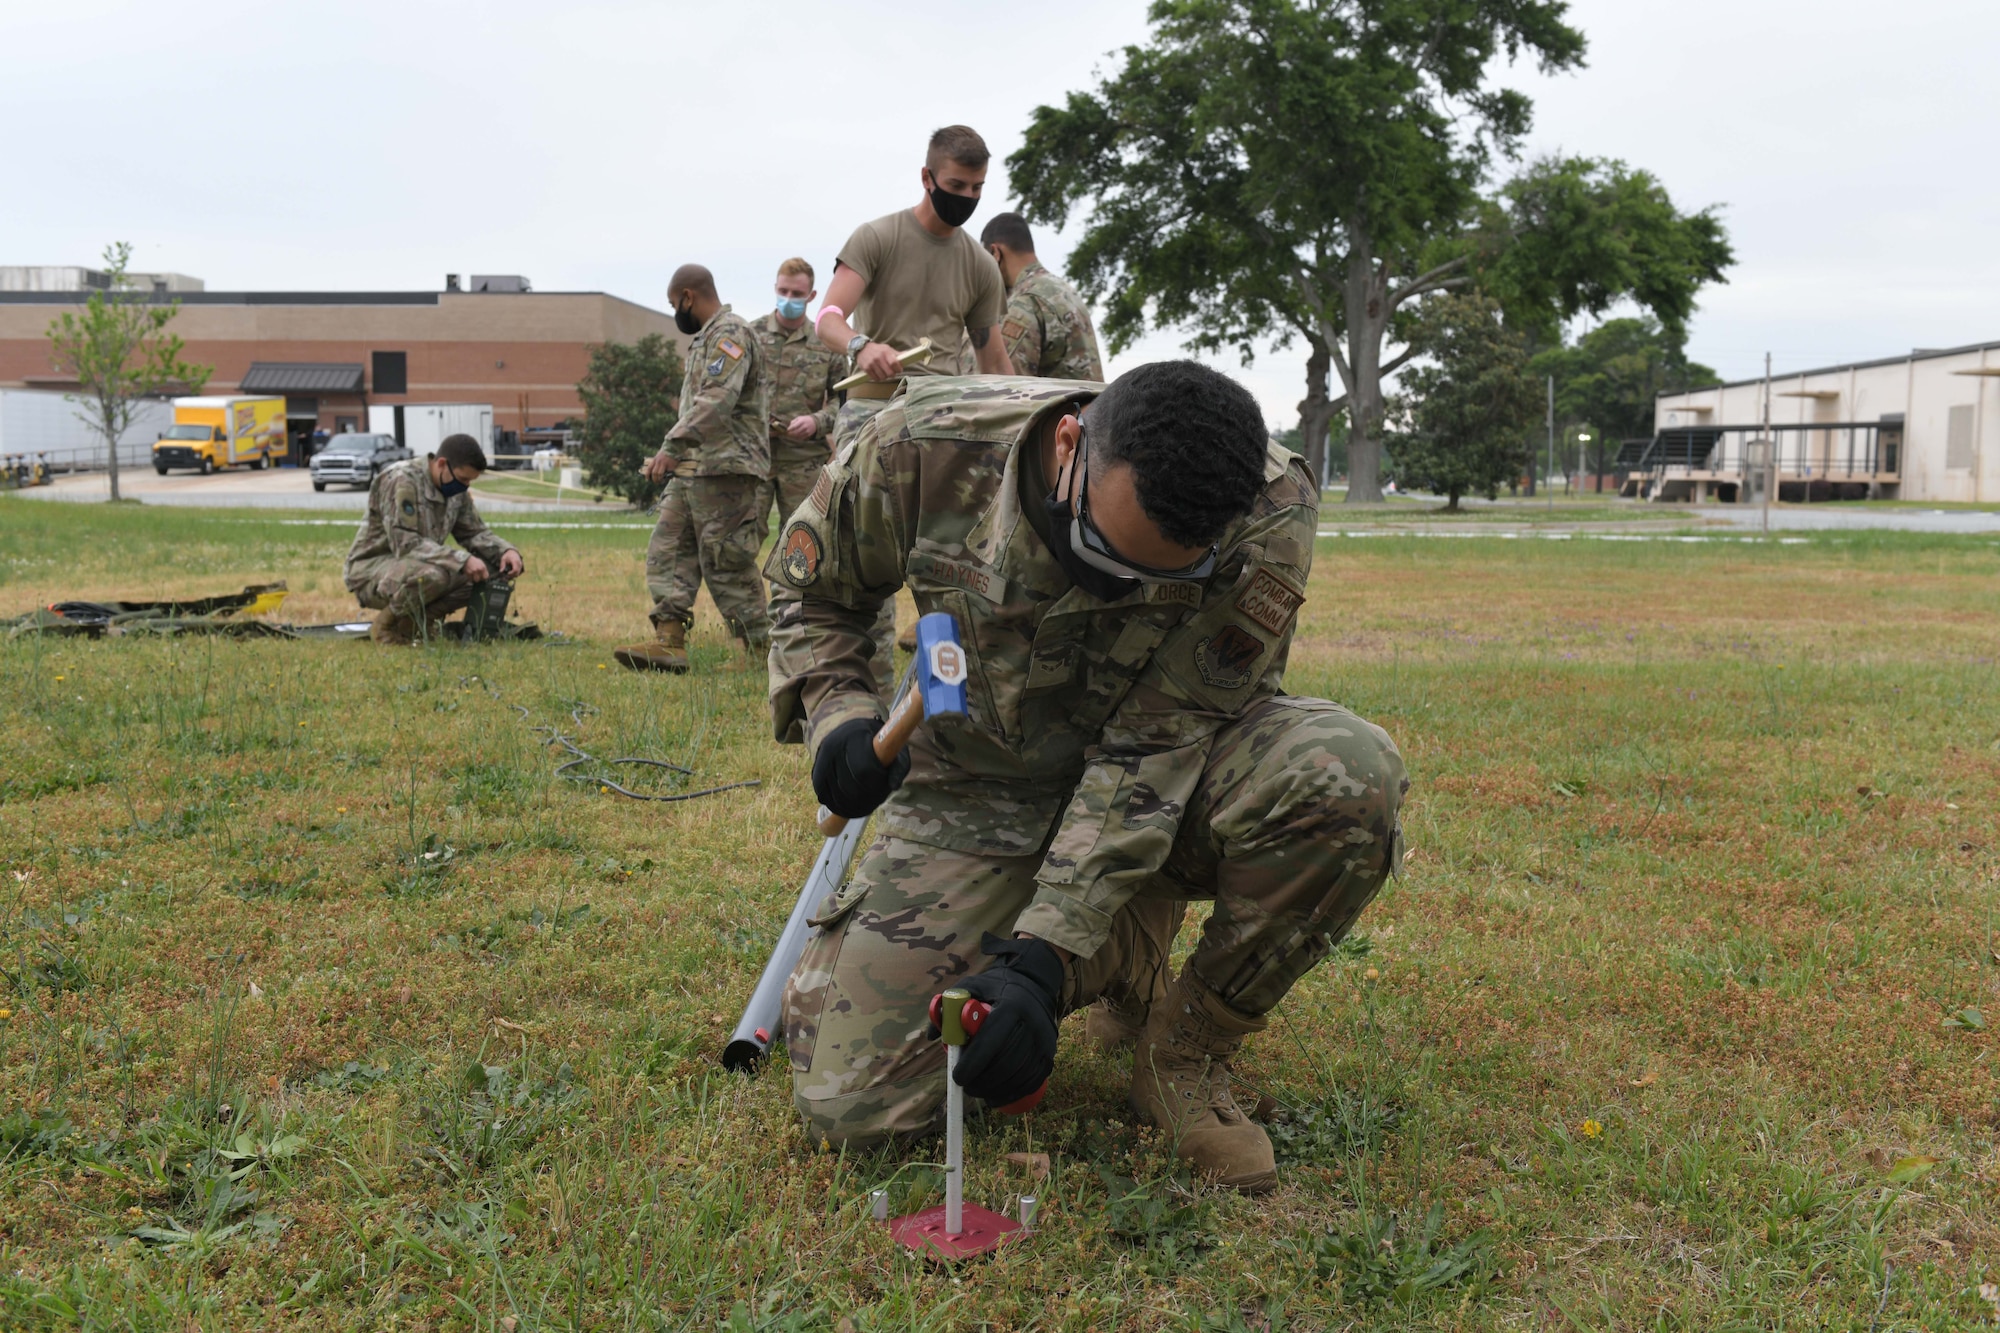 Photo shows Airman hammering spike into ground.